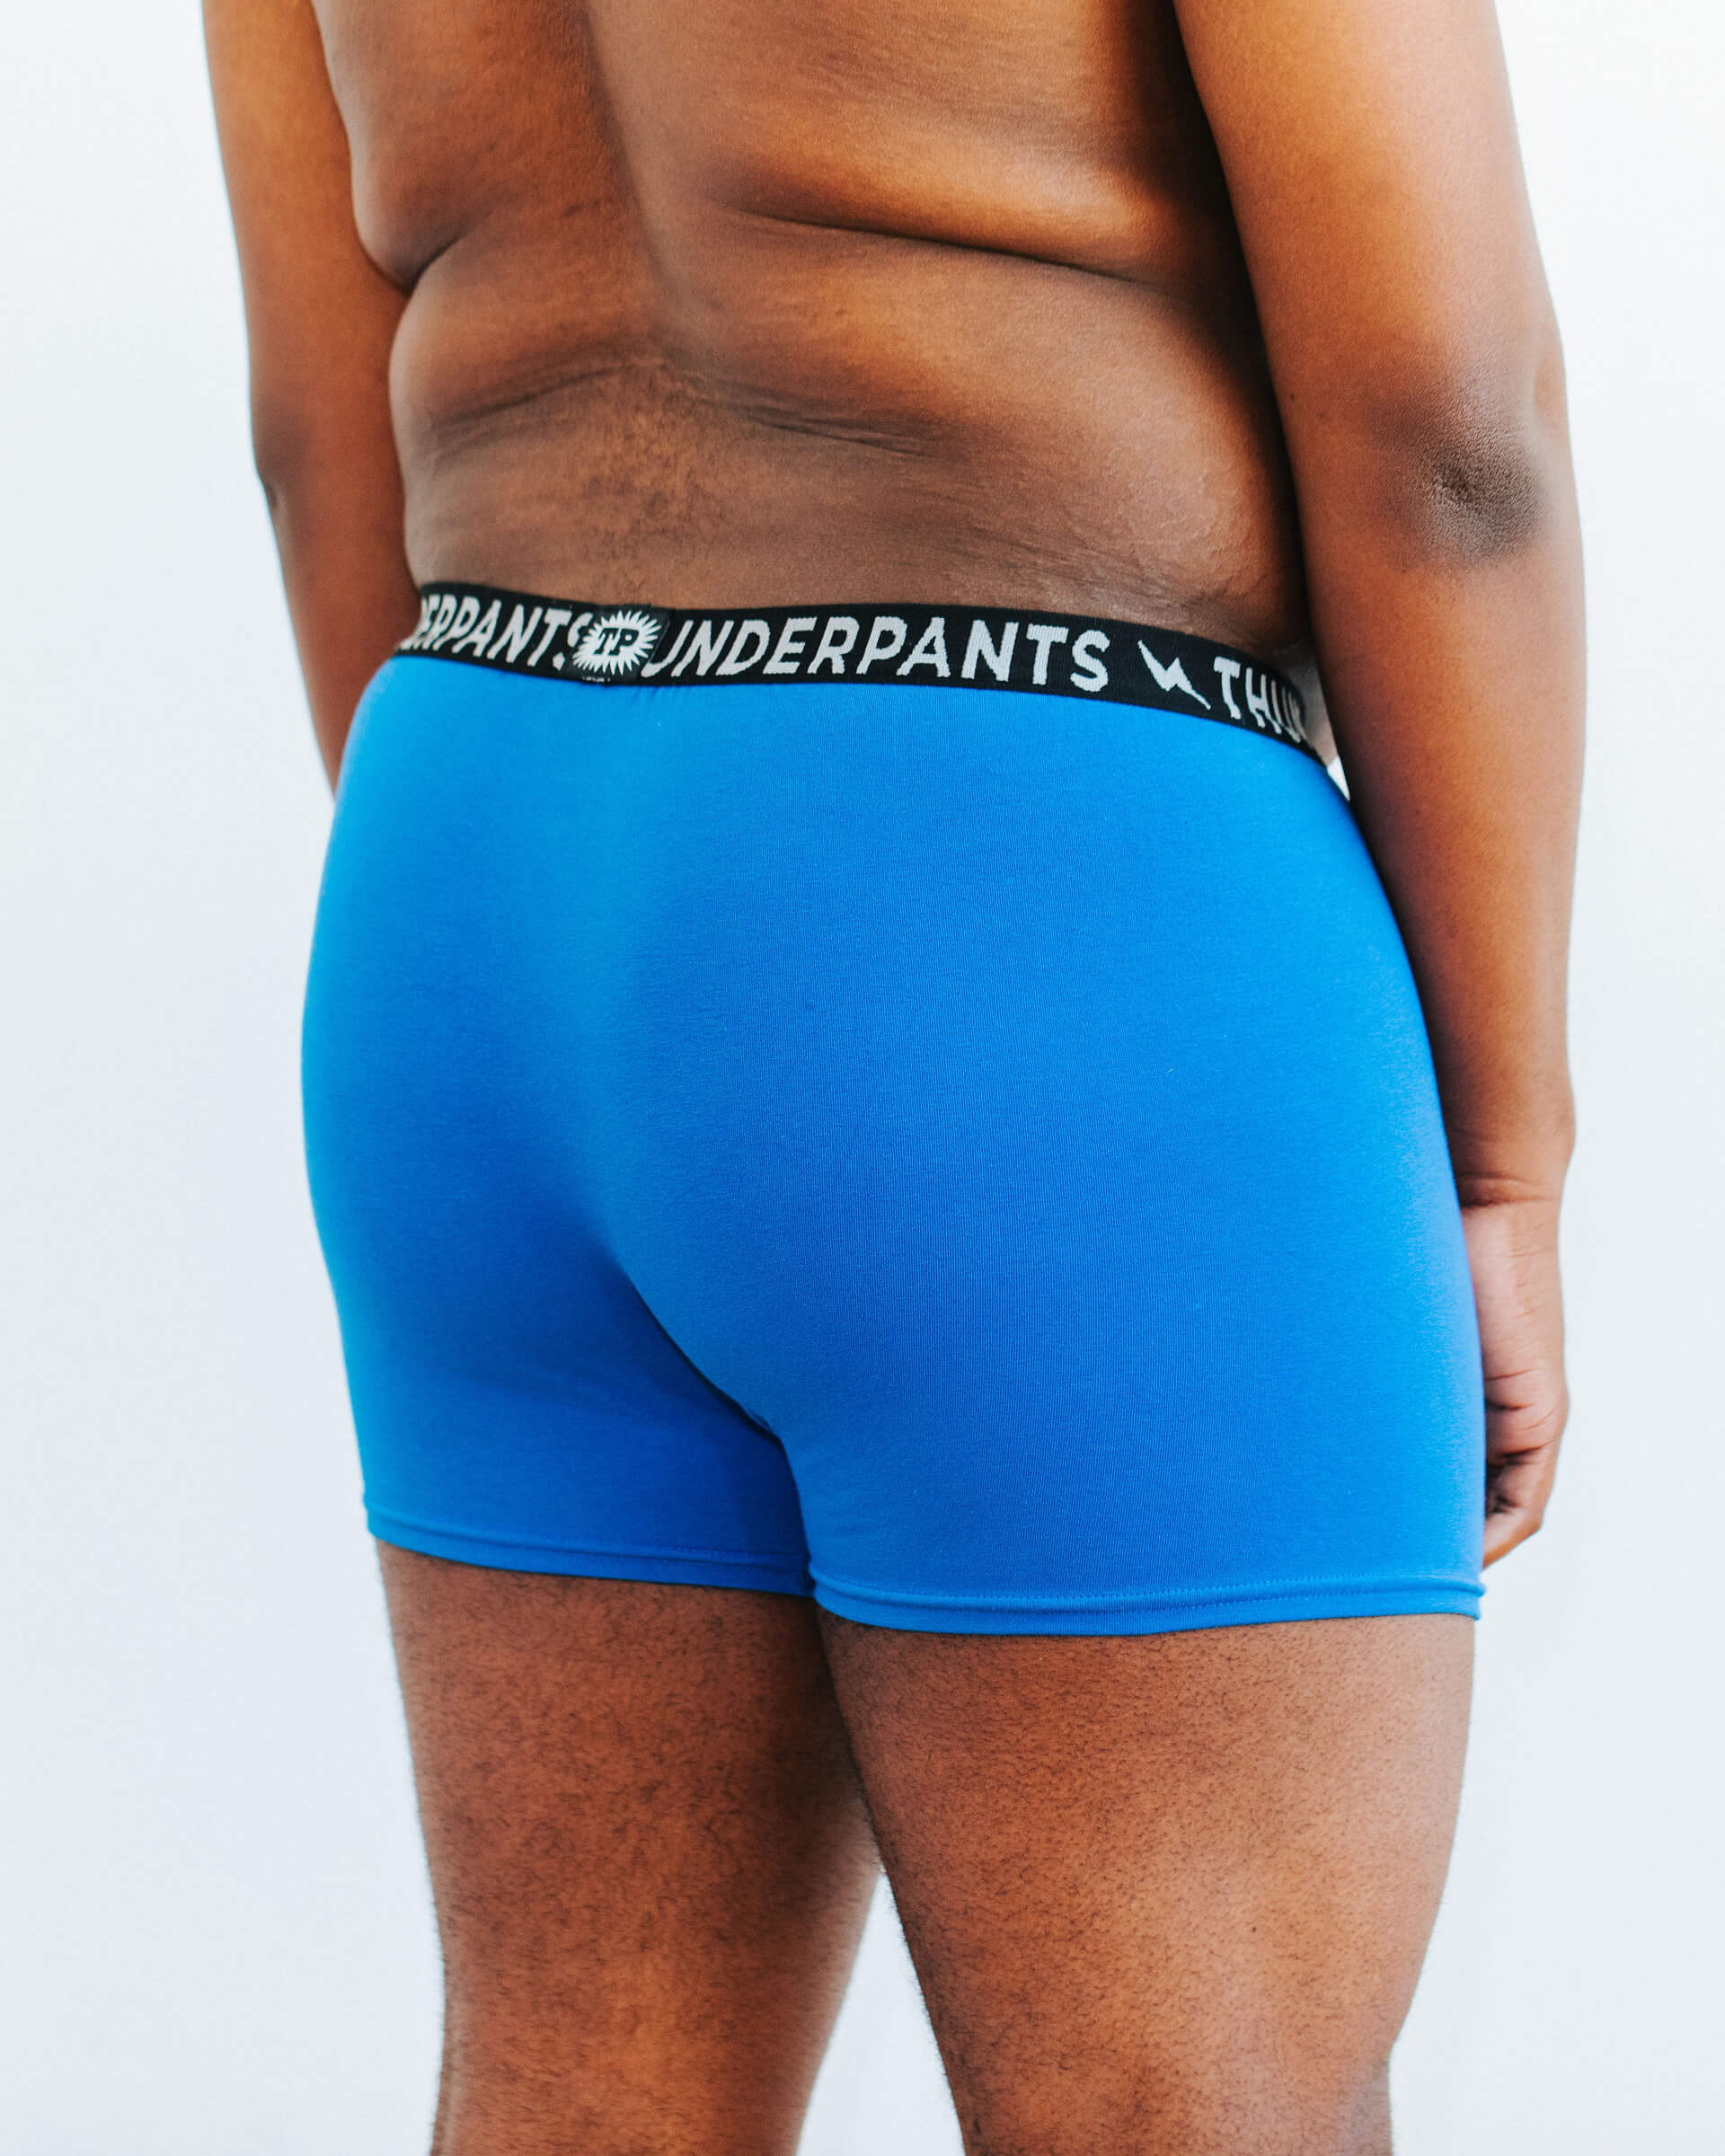 Back photo showing Thunderpants Organic Cotton Boxer Brief style underwear in Blueberry Blue on a model.